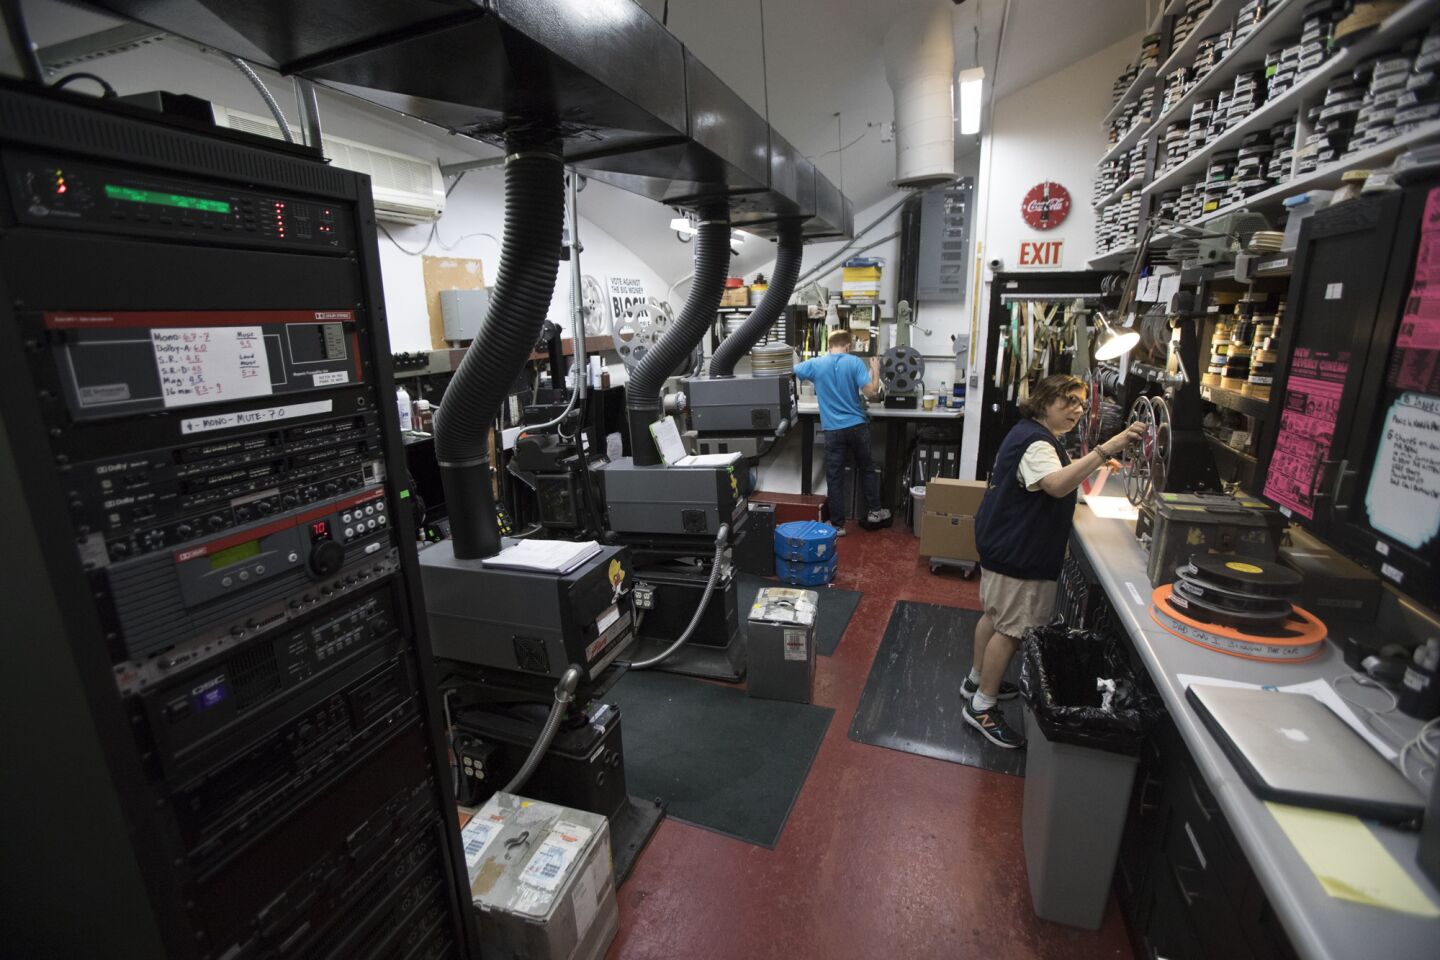 The projection booth at the New Beverly Cinema.